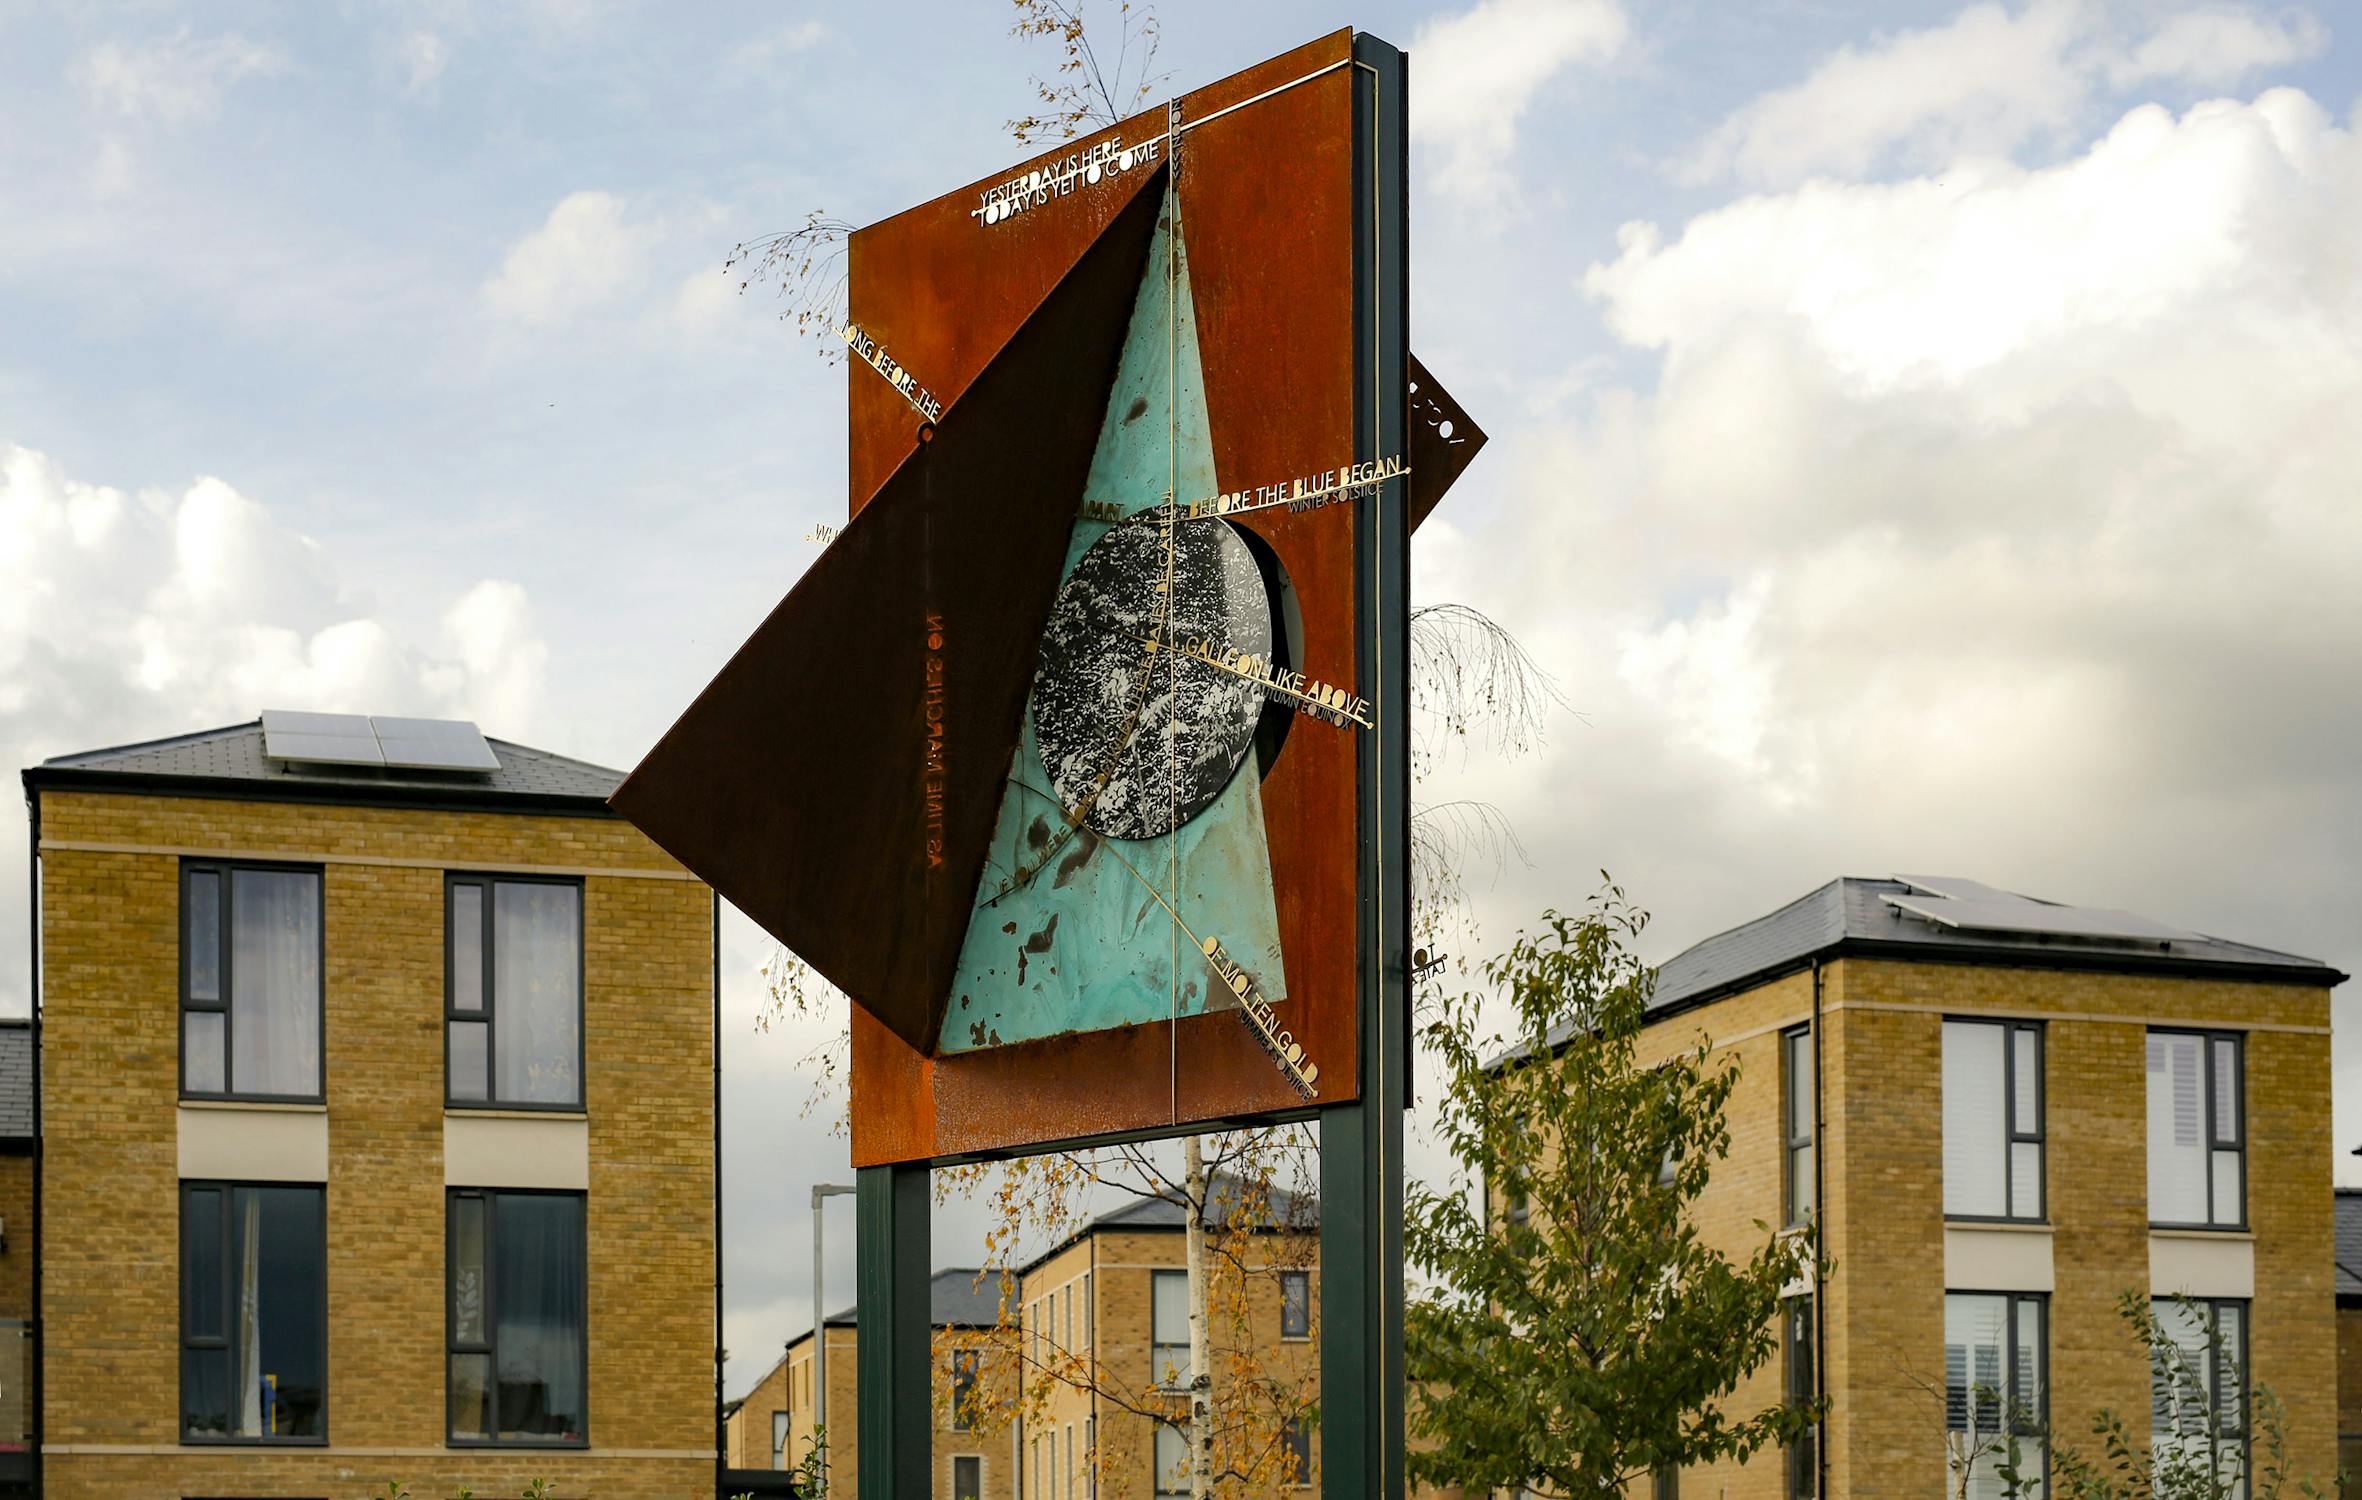 Holly Graham, While the Piled Cumuli Sail Galleon-Like Above, 2020. Public artwork for Cane Hill Park, Surrey; commissioned by Barrett David Wilson Homes. Image © Matt Reading.